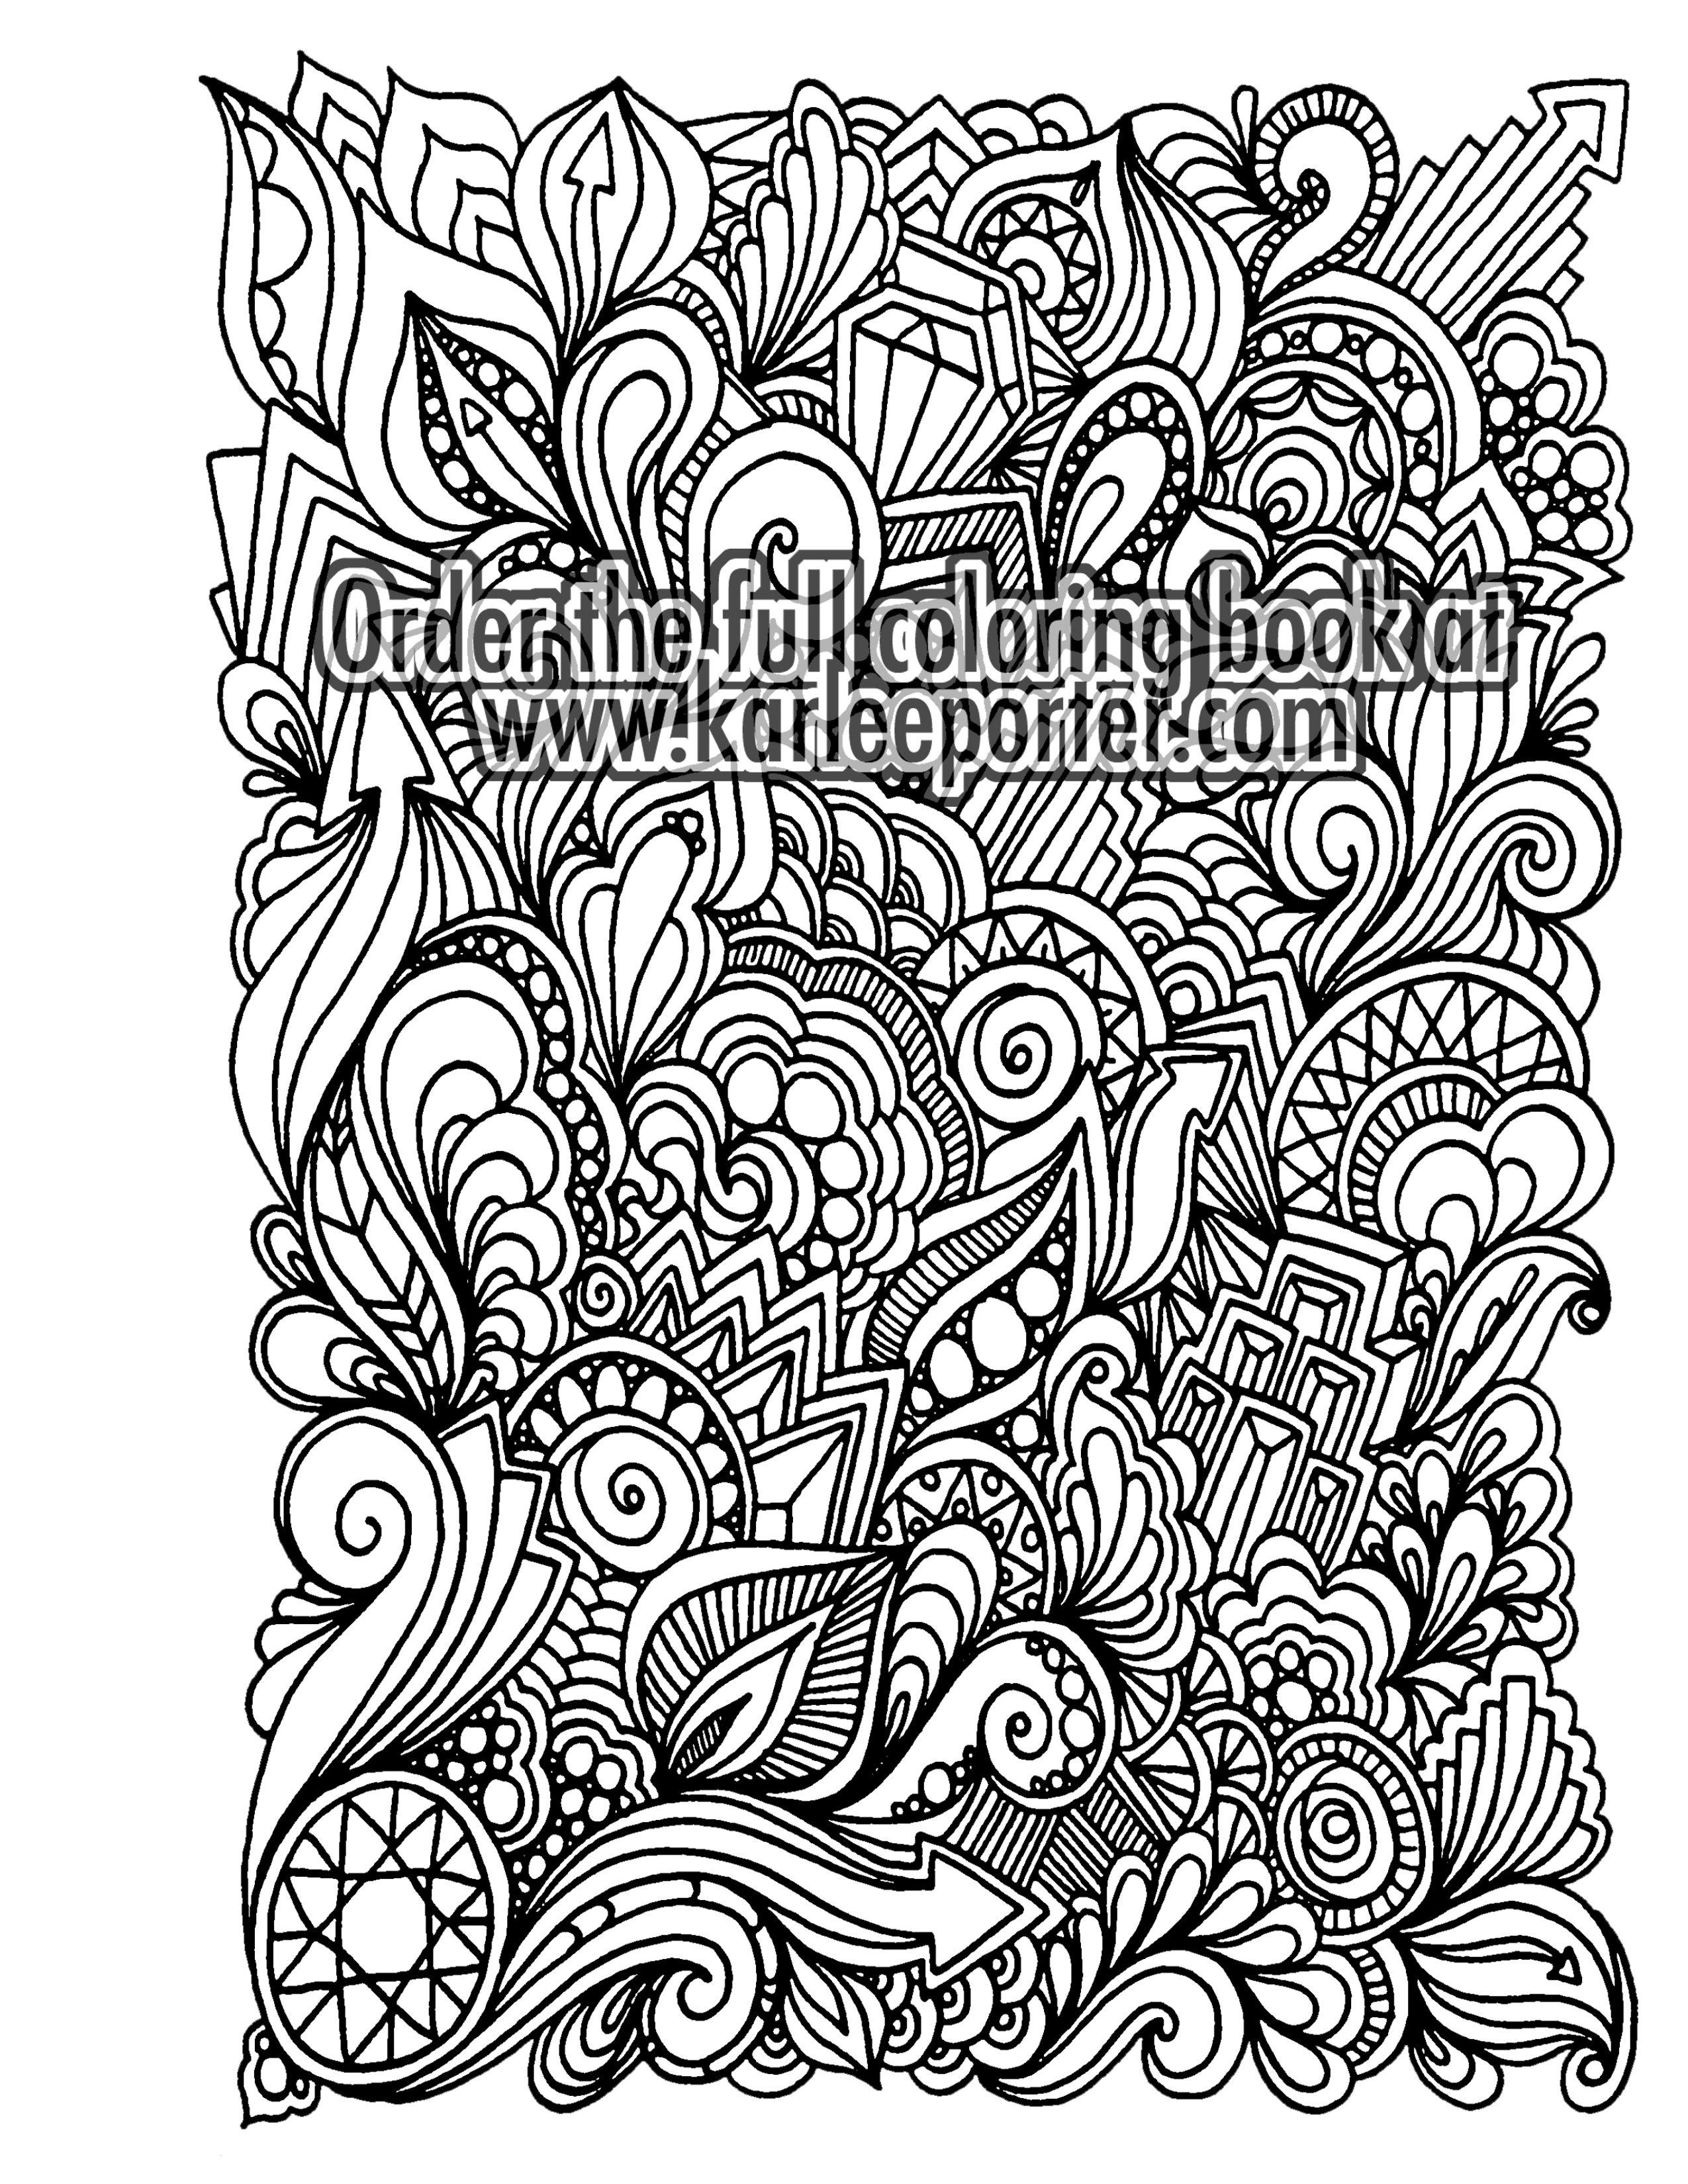 Coloring Books For Teen Girls Vol 1: Detailed Designs: Complex